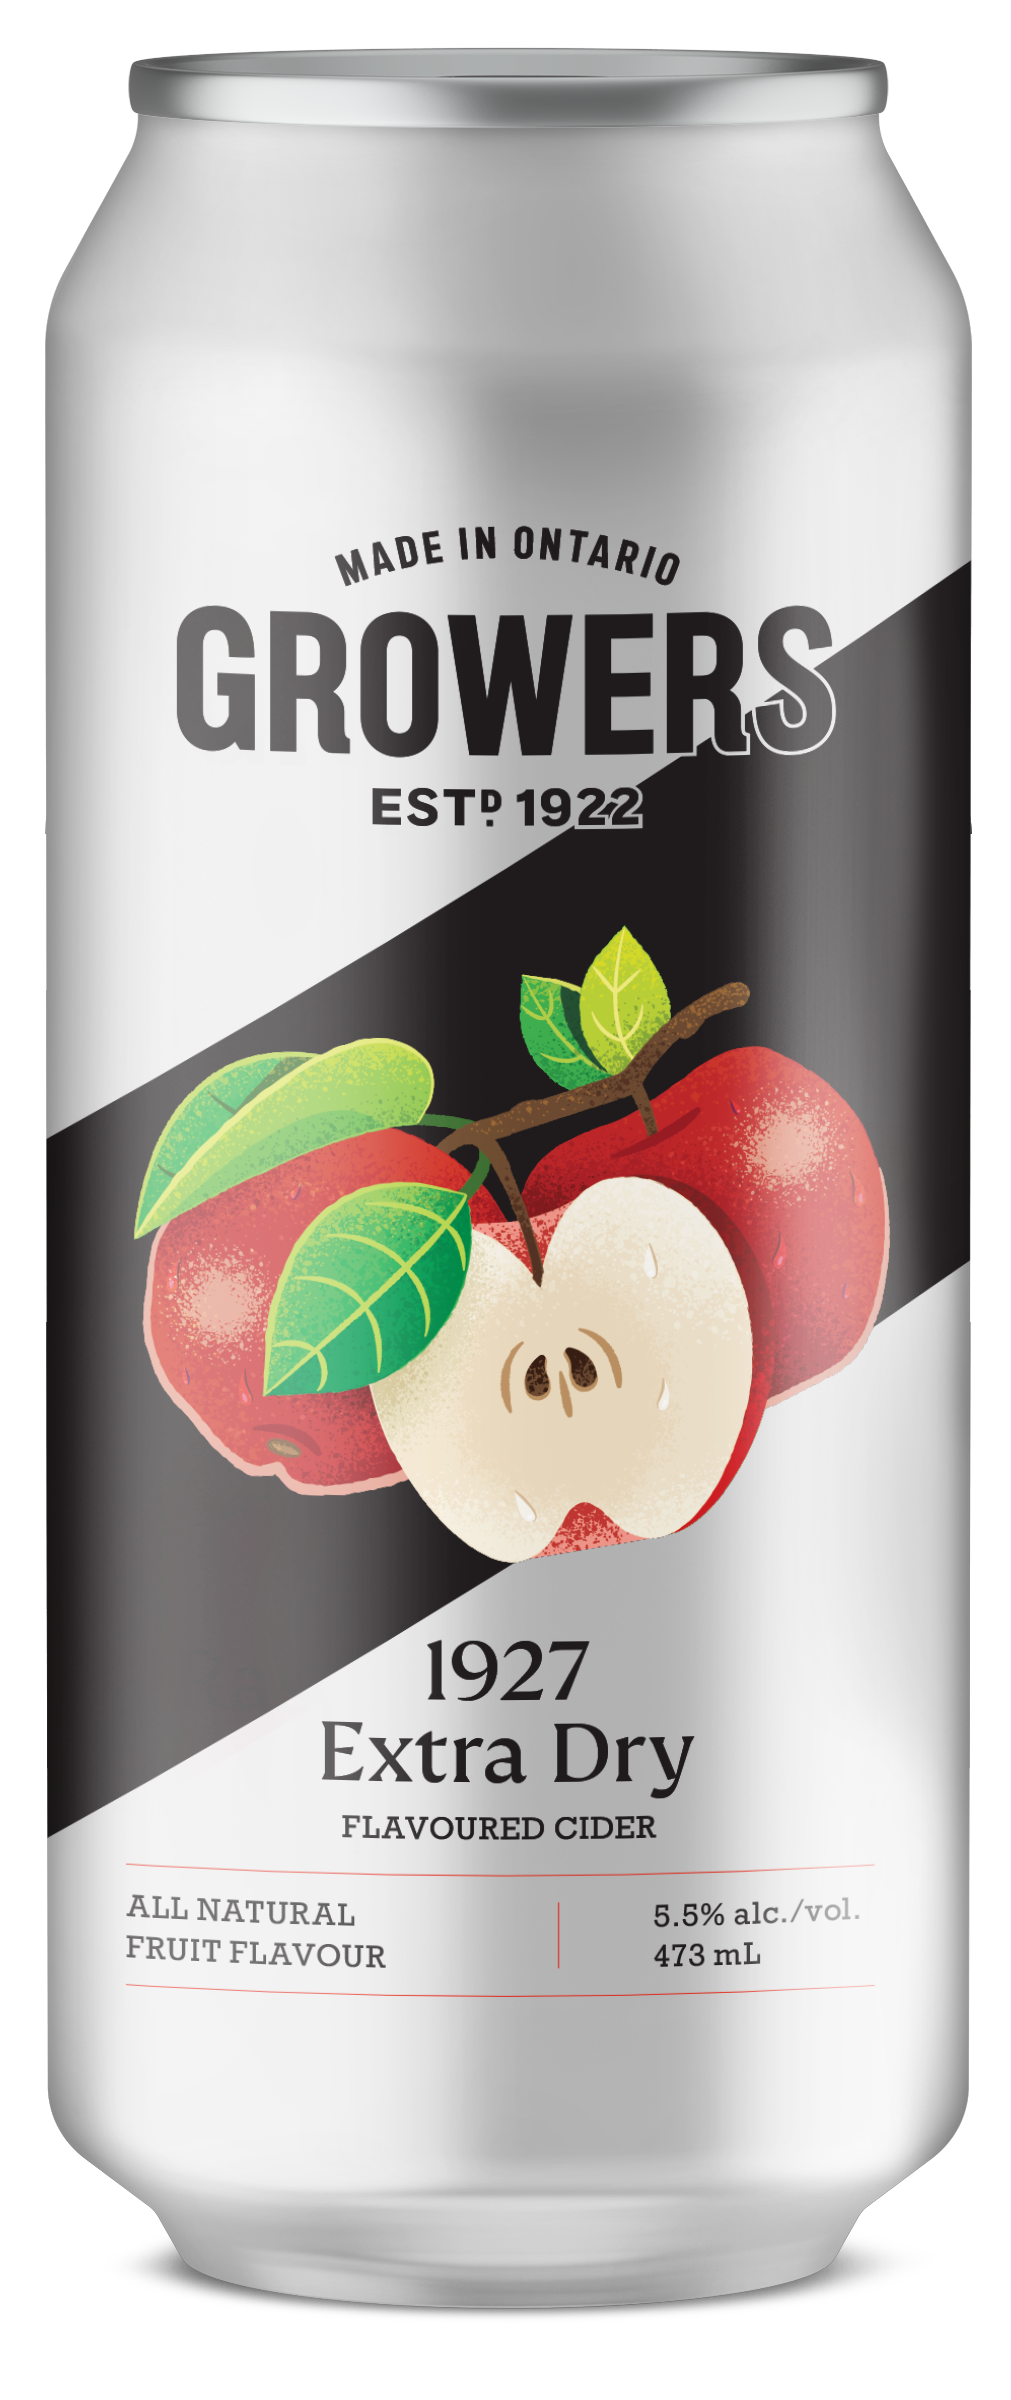 Can of 1927 Extra Dry flavored Growers cider